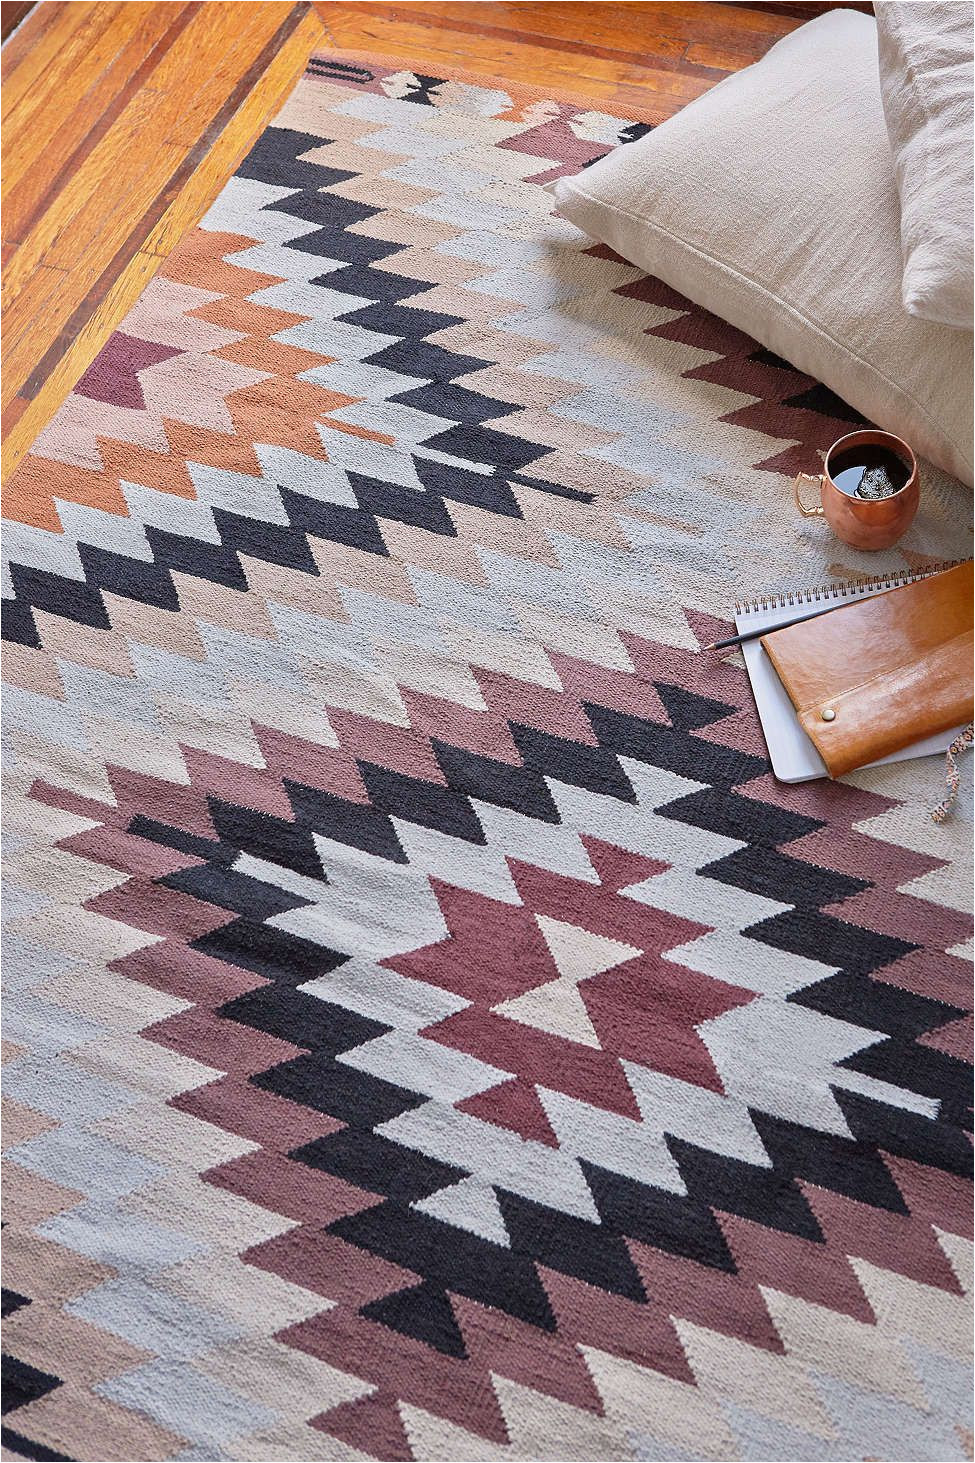 the pattern of this rug combined with these colors makes it the ideal accent piece in any room